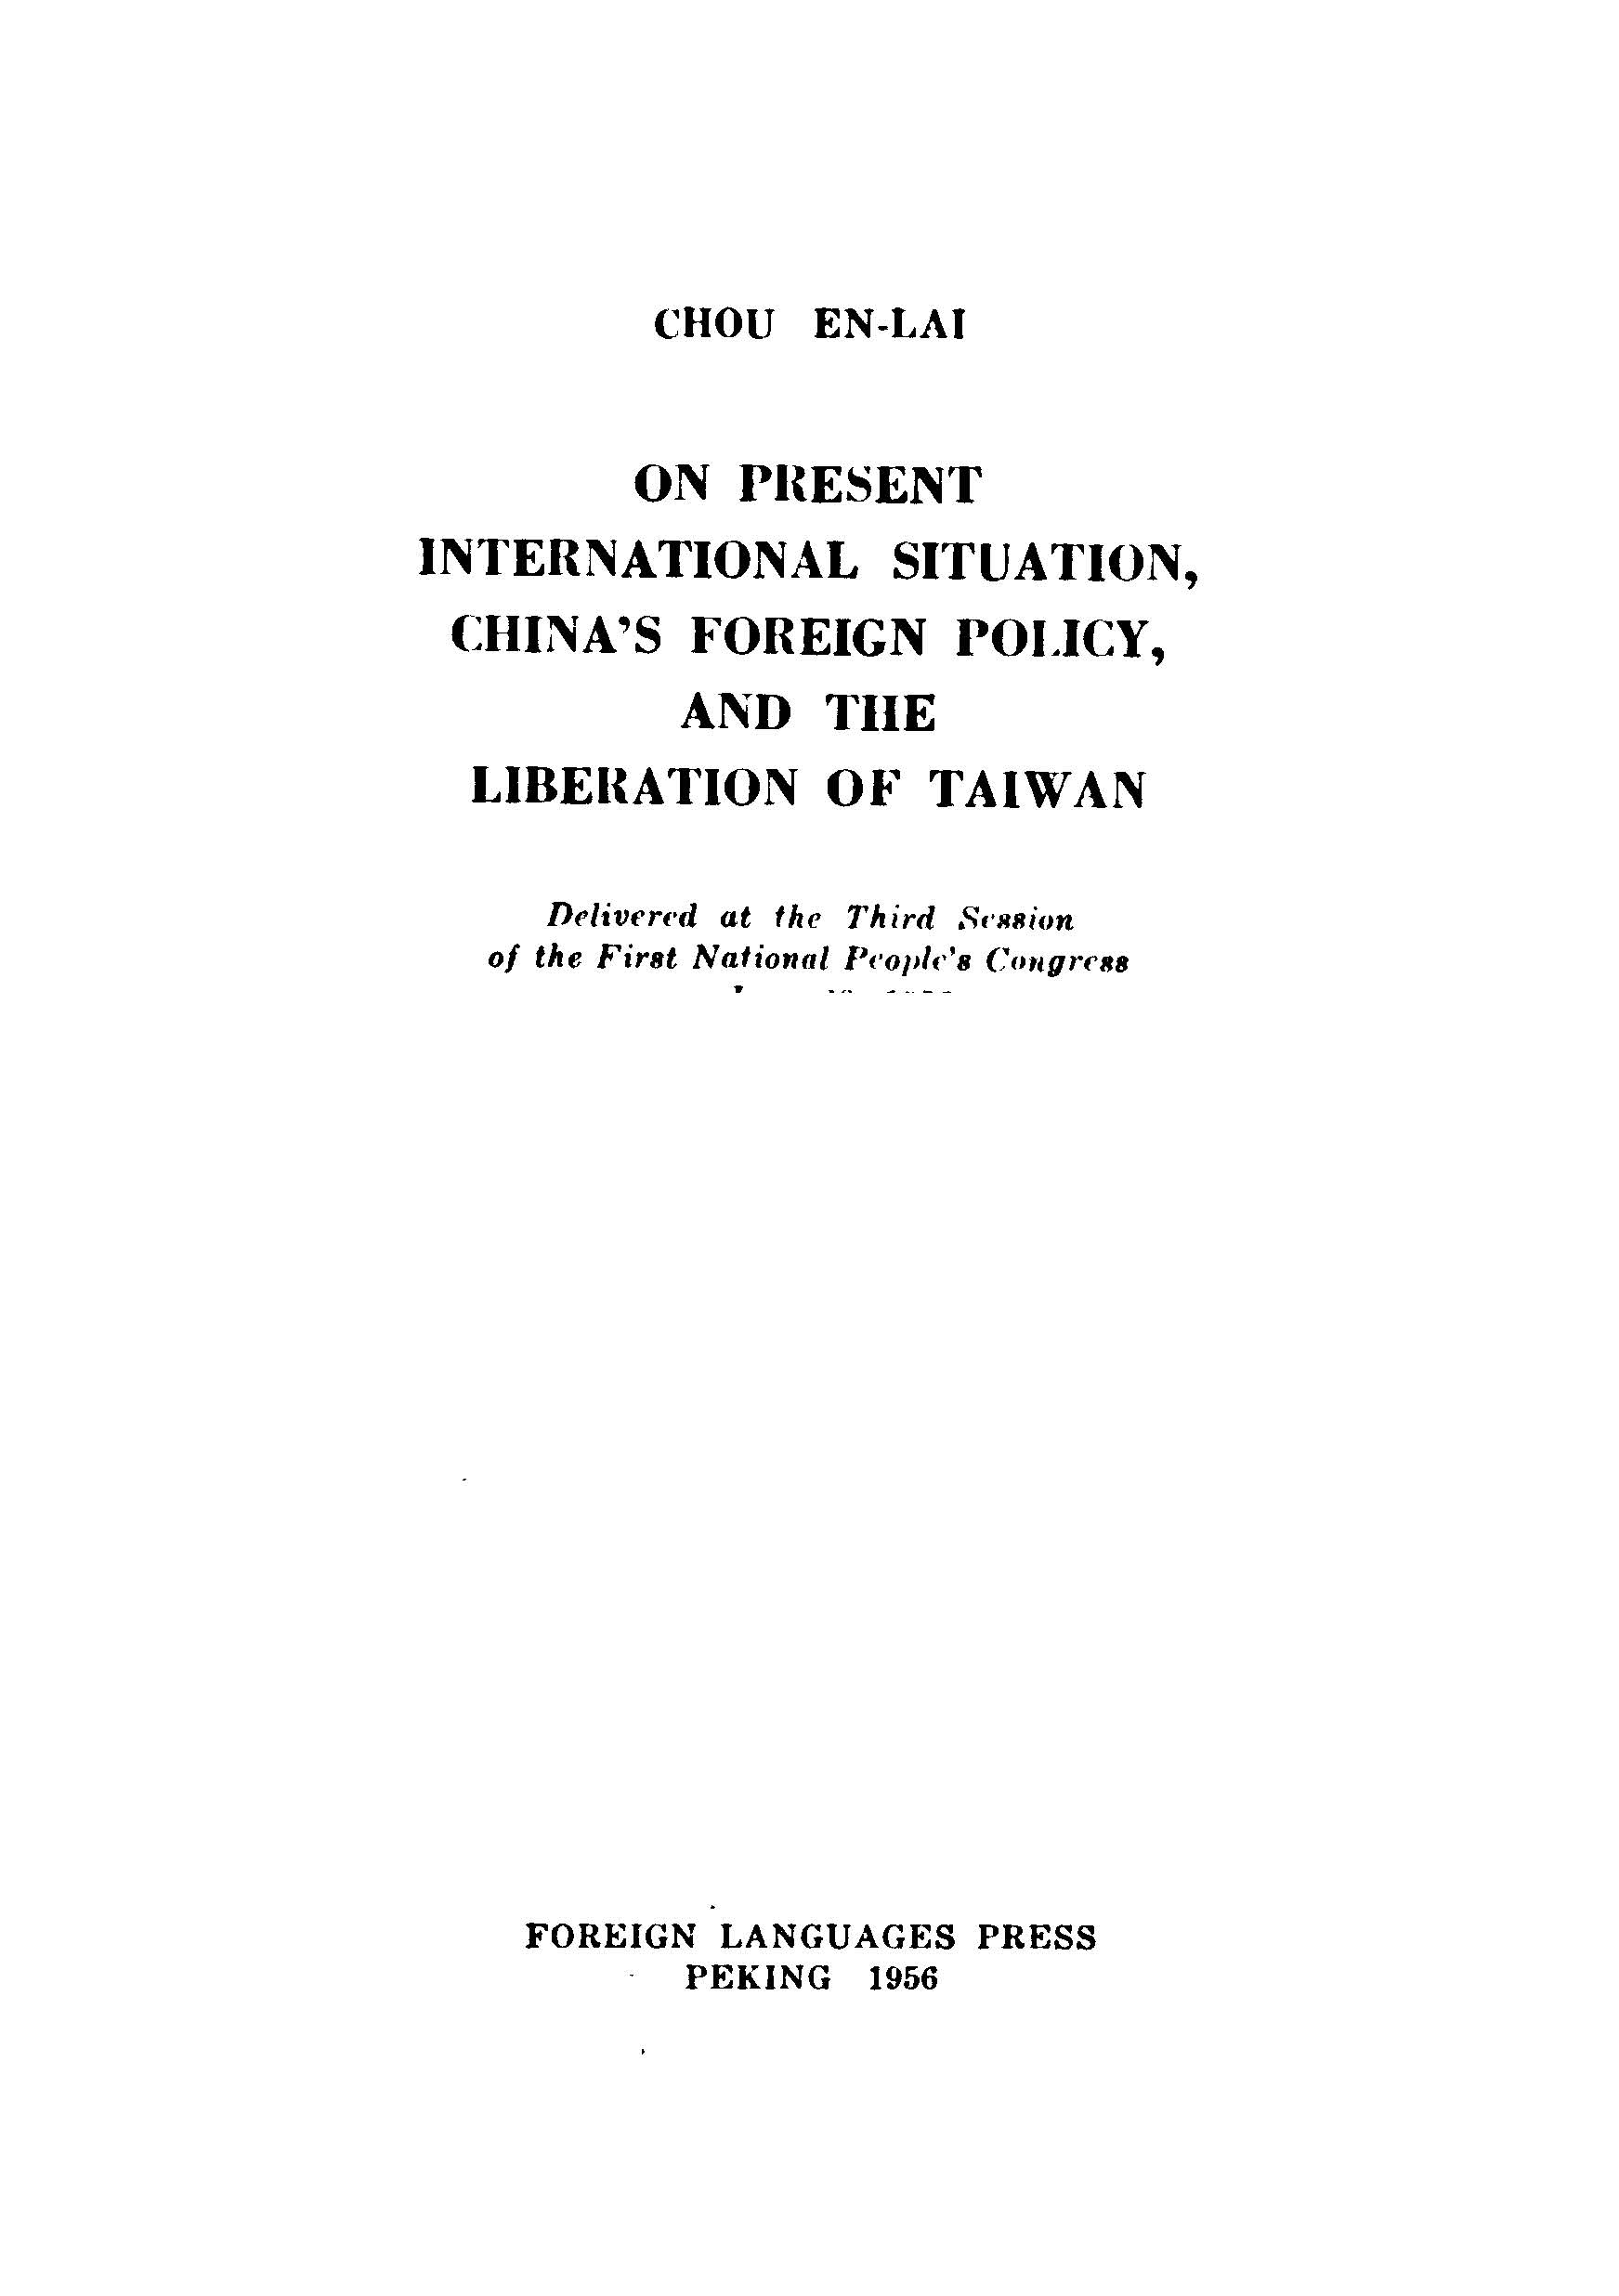 On Present International Situdtion, china's Foreign Policy, And The Liberation Of Taiwan